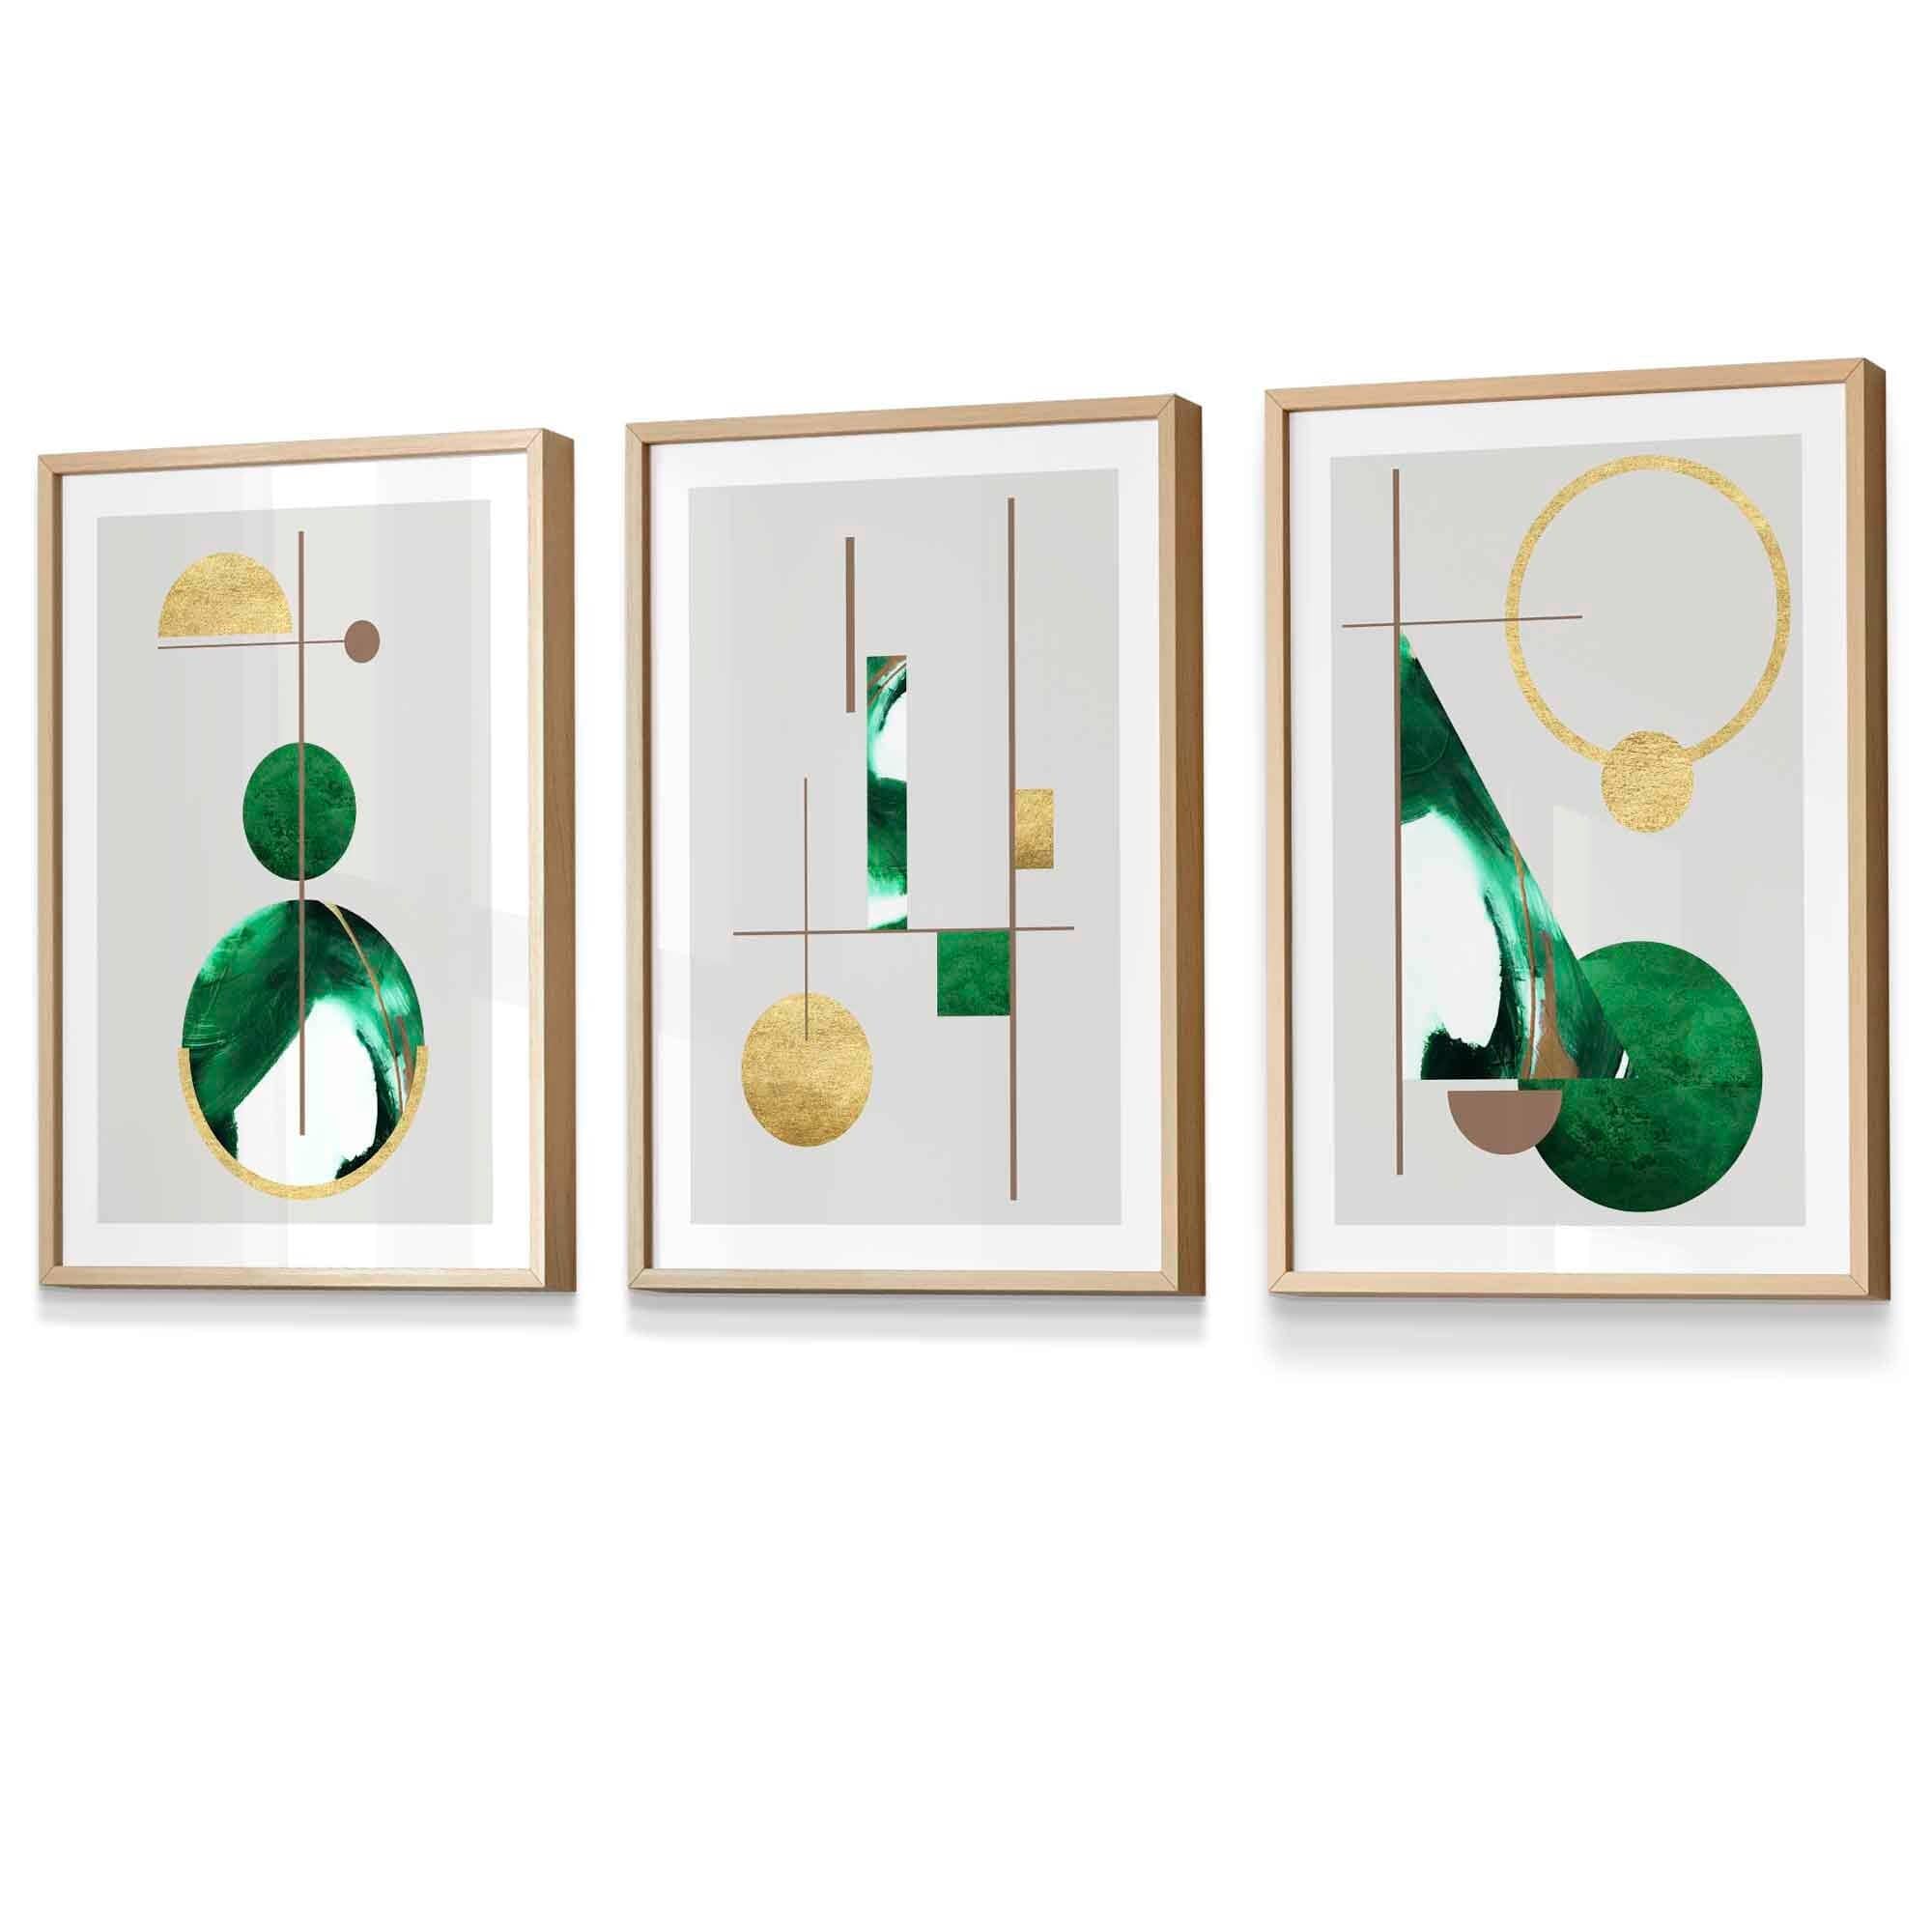 Abstract Textured Geometric Mid Century Modern FRAMED Art in Green and Gold | Artze Wall Art UK